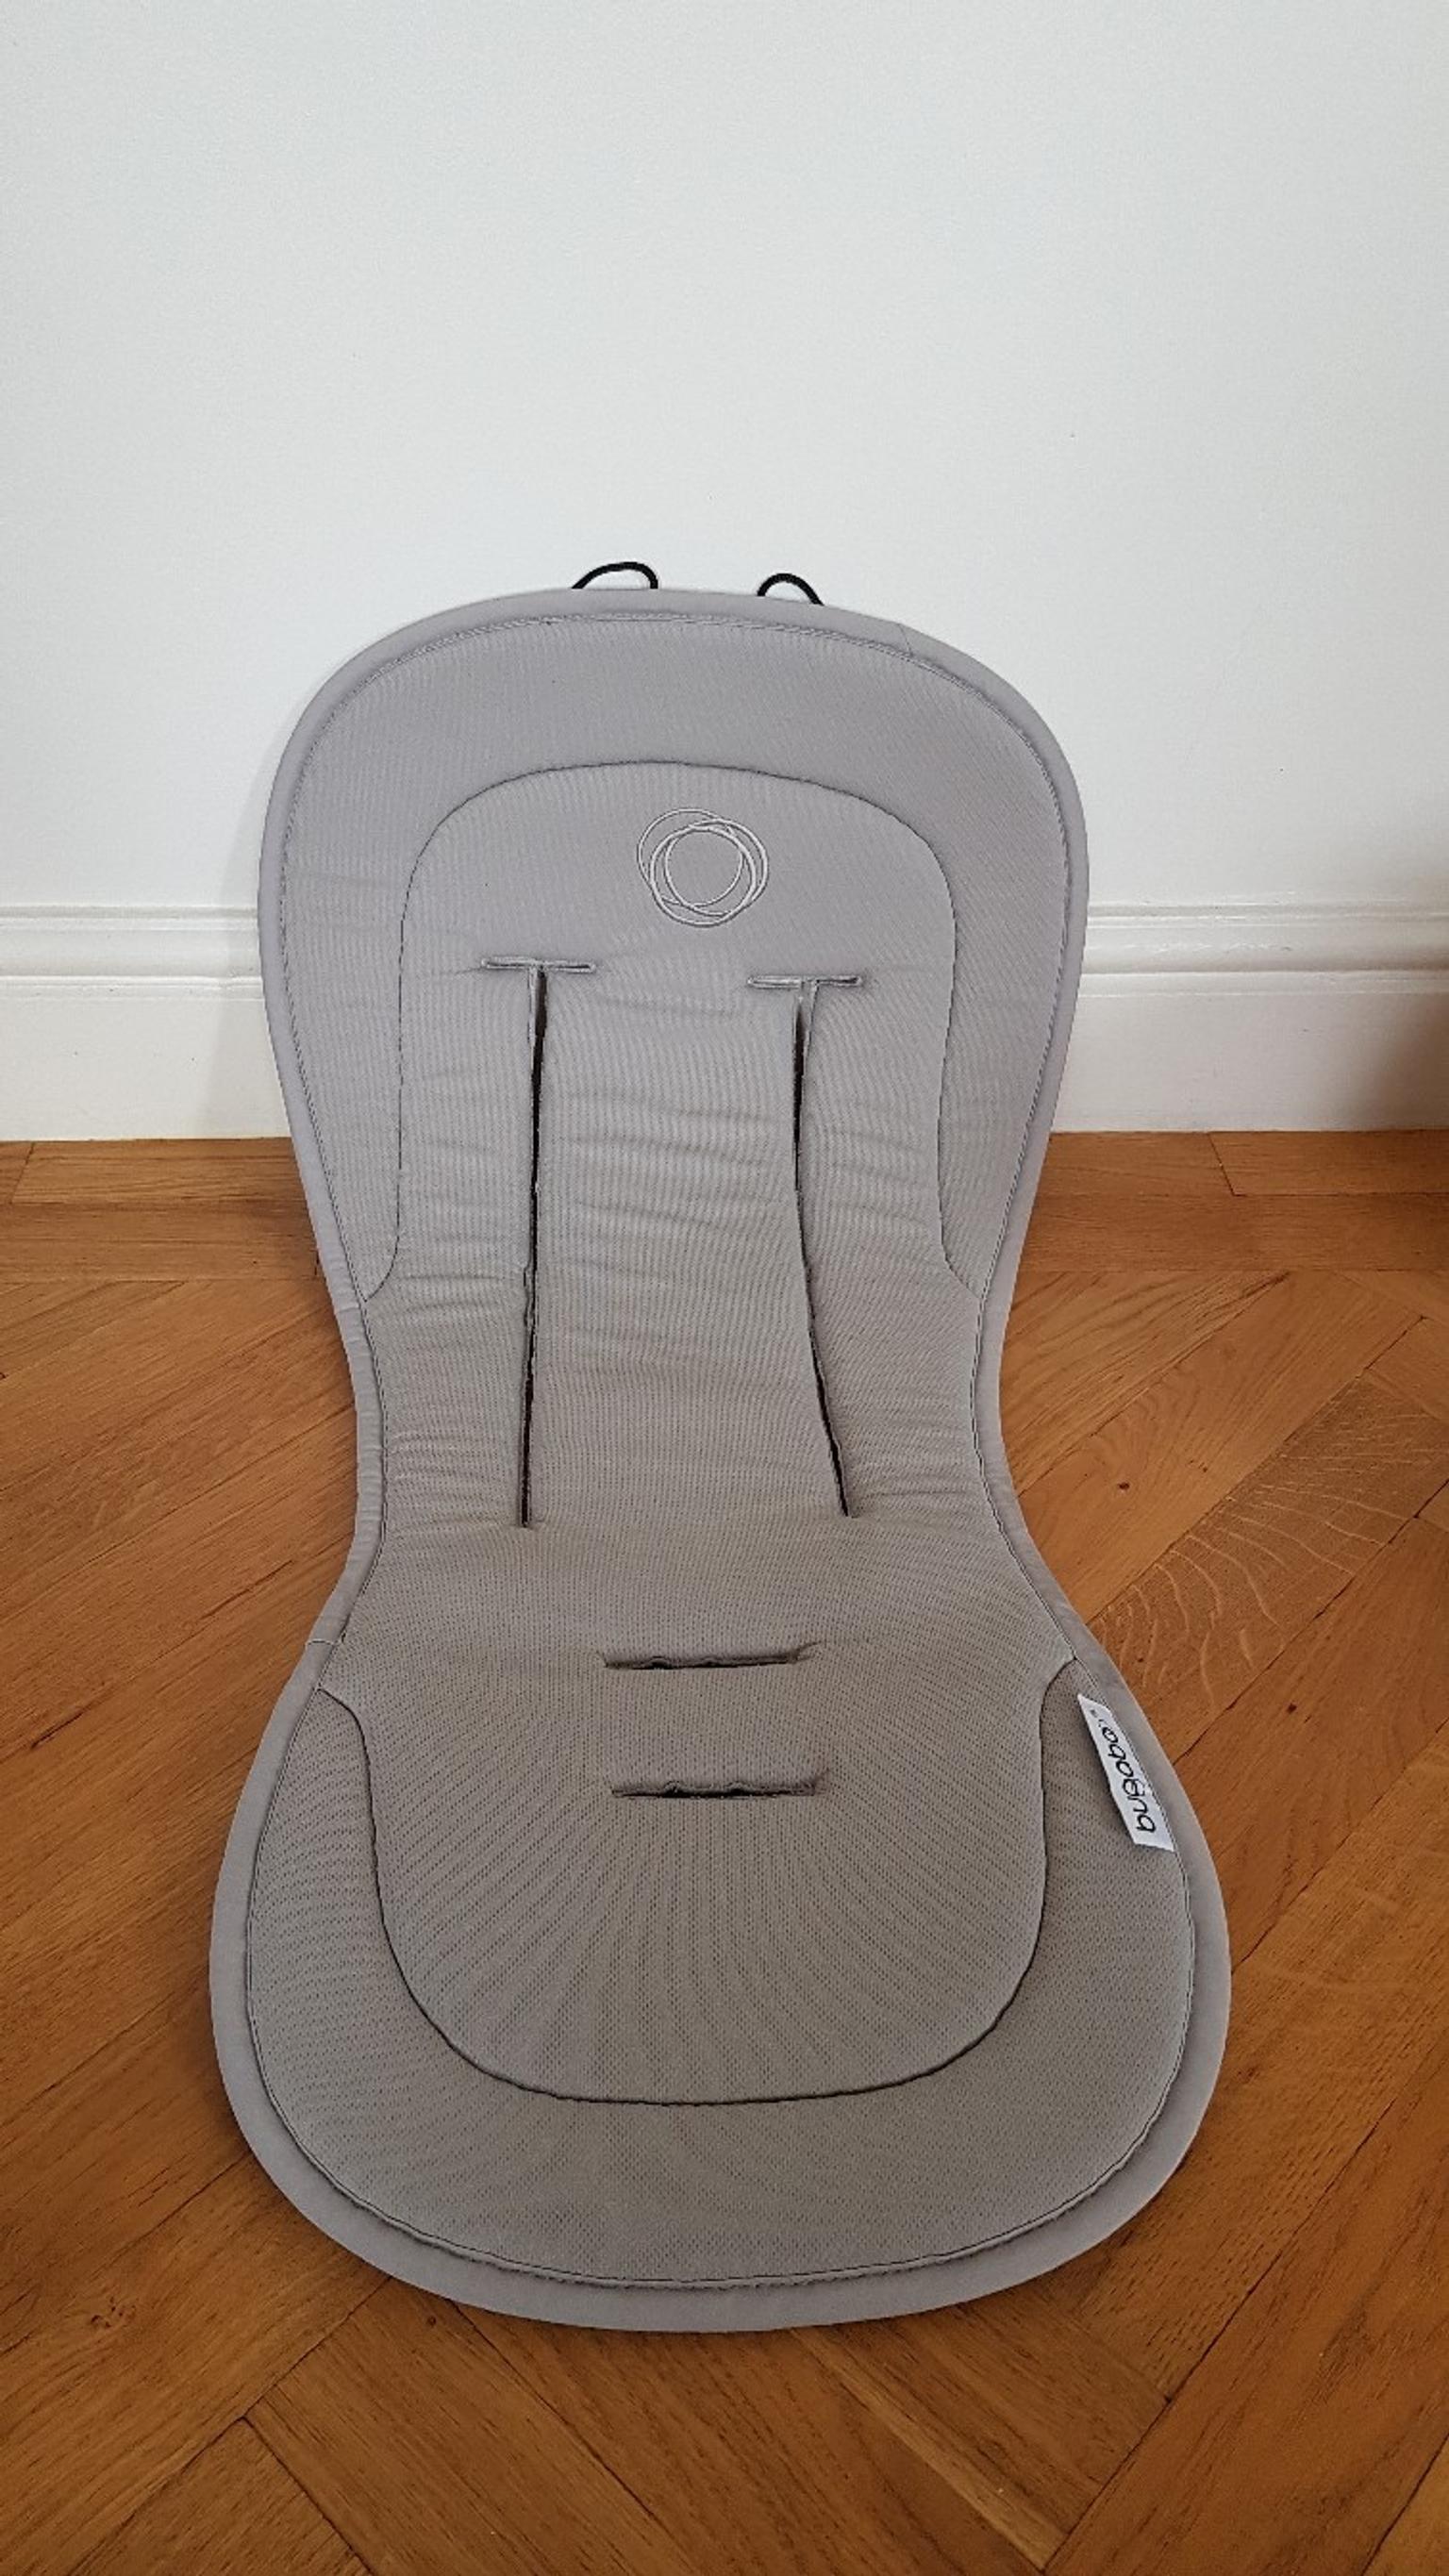 breezy seat liner bugaboo